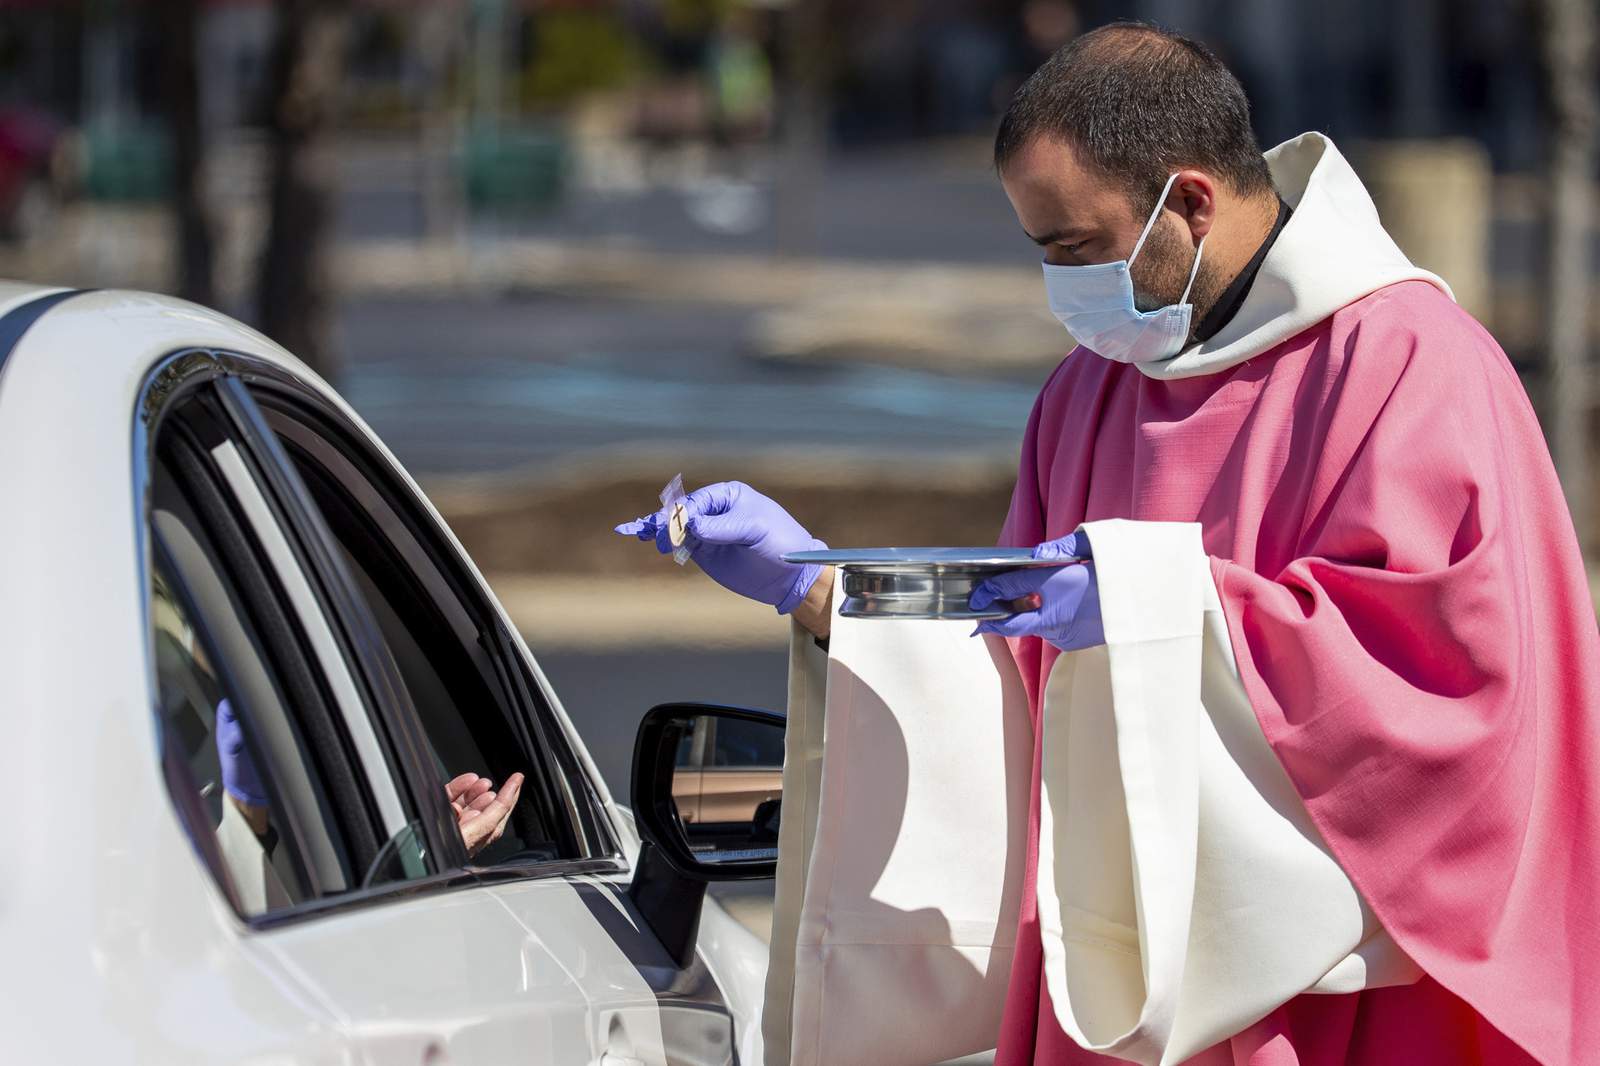 Pandemic will alter Communion rituals for many US Christians